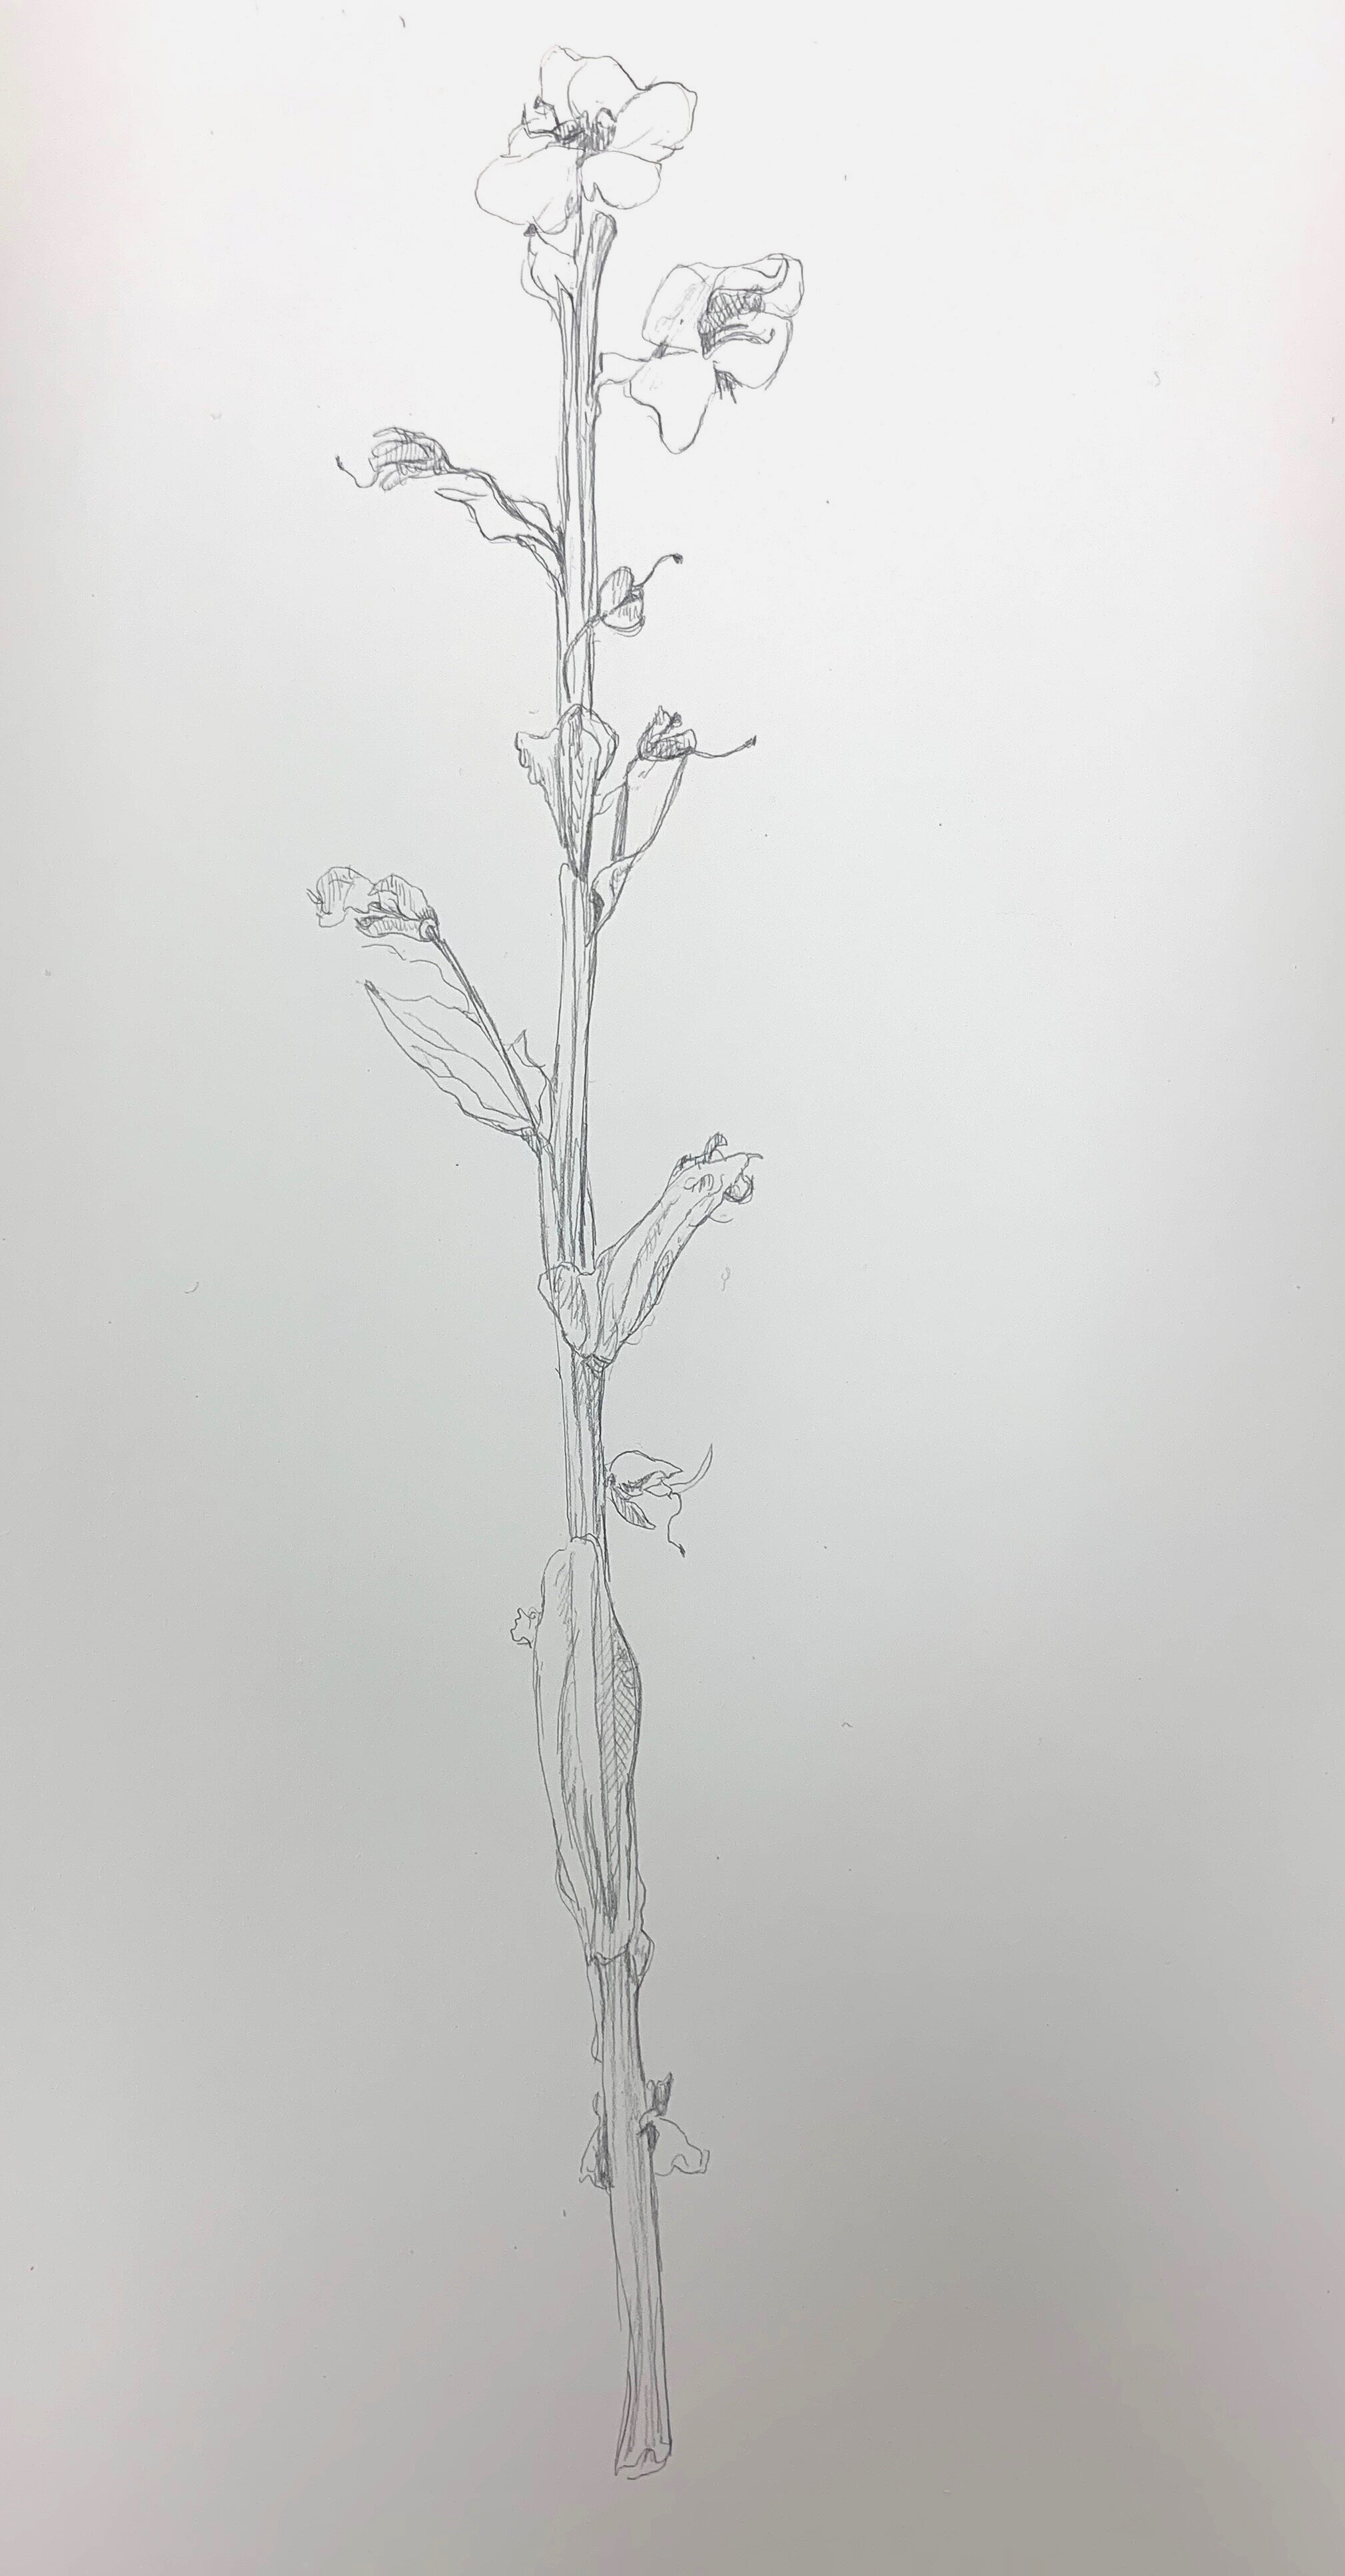 Sketchbook study from mower gleanings - Sundrops, silverpoint on ground